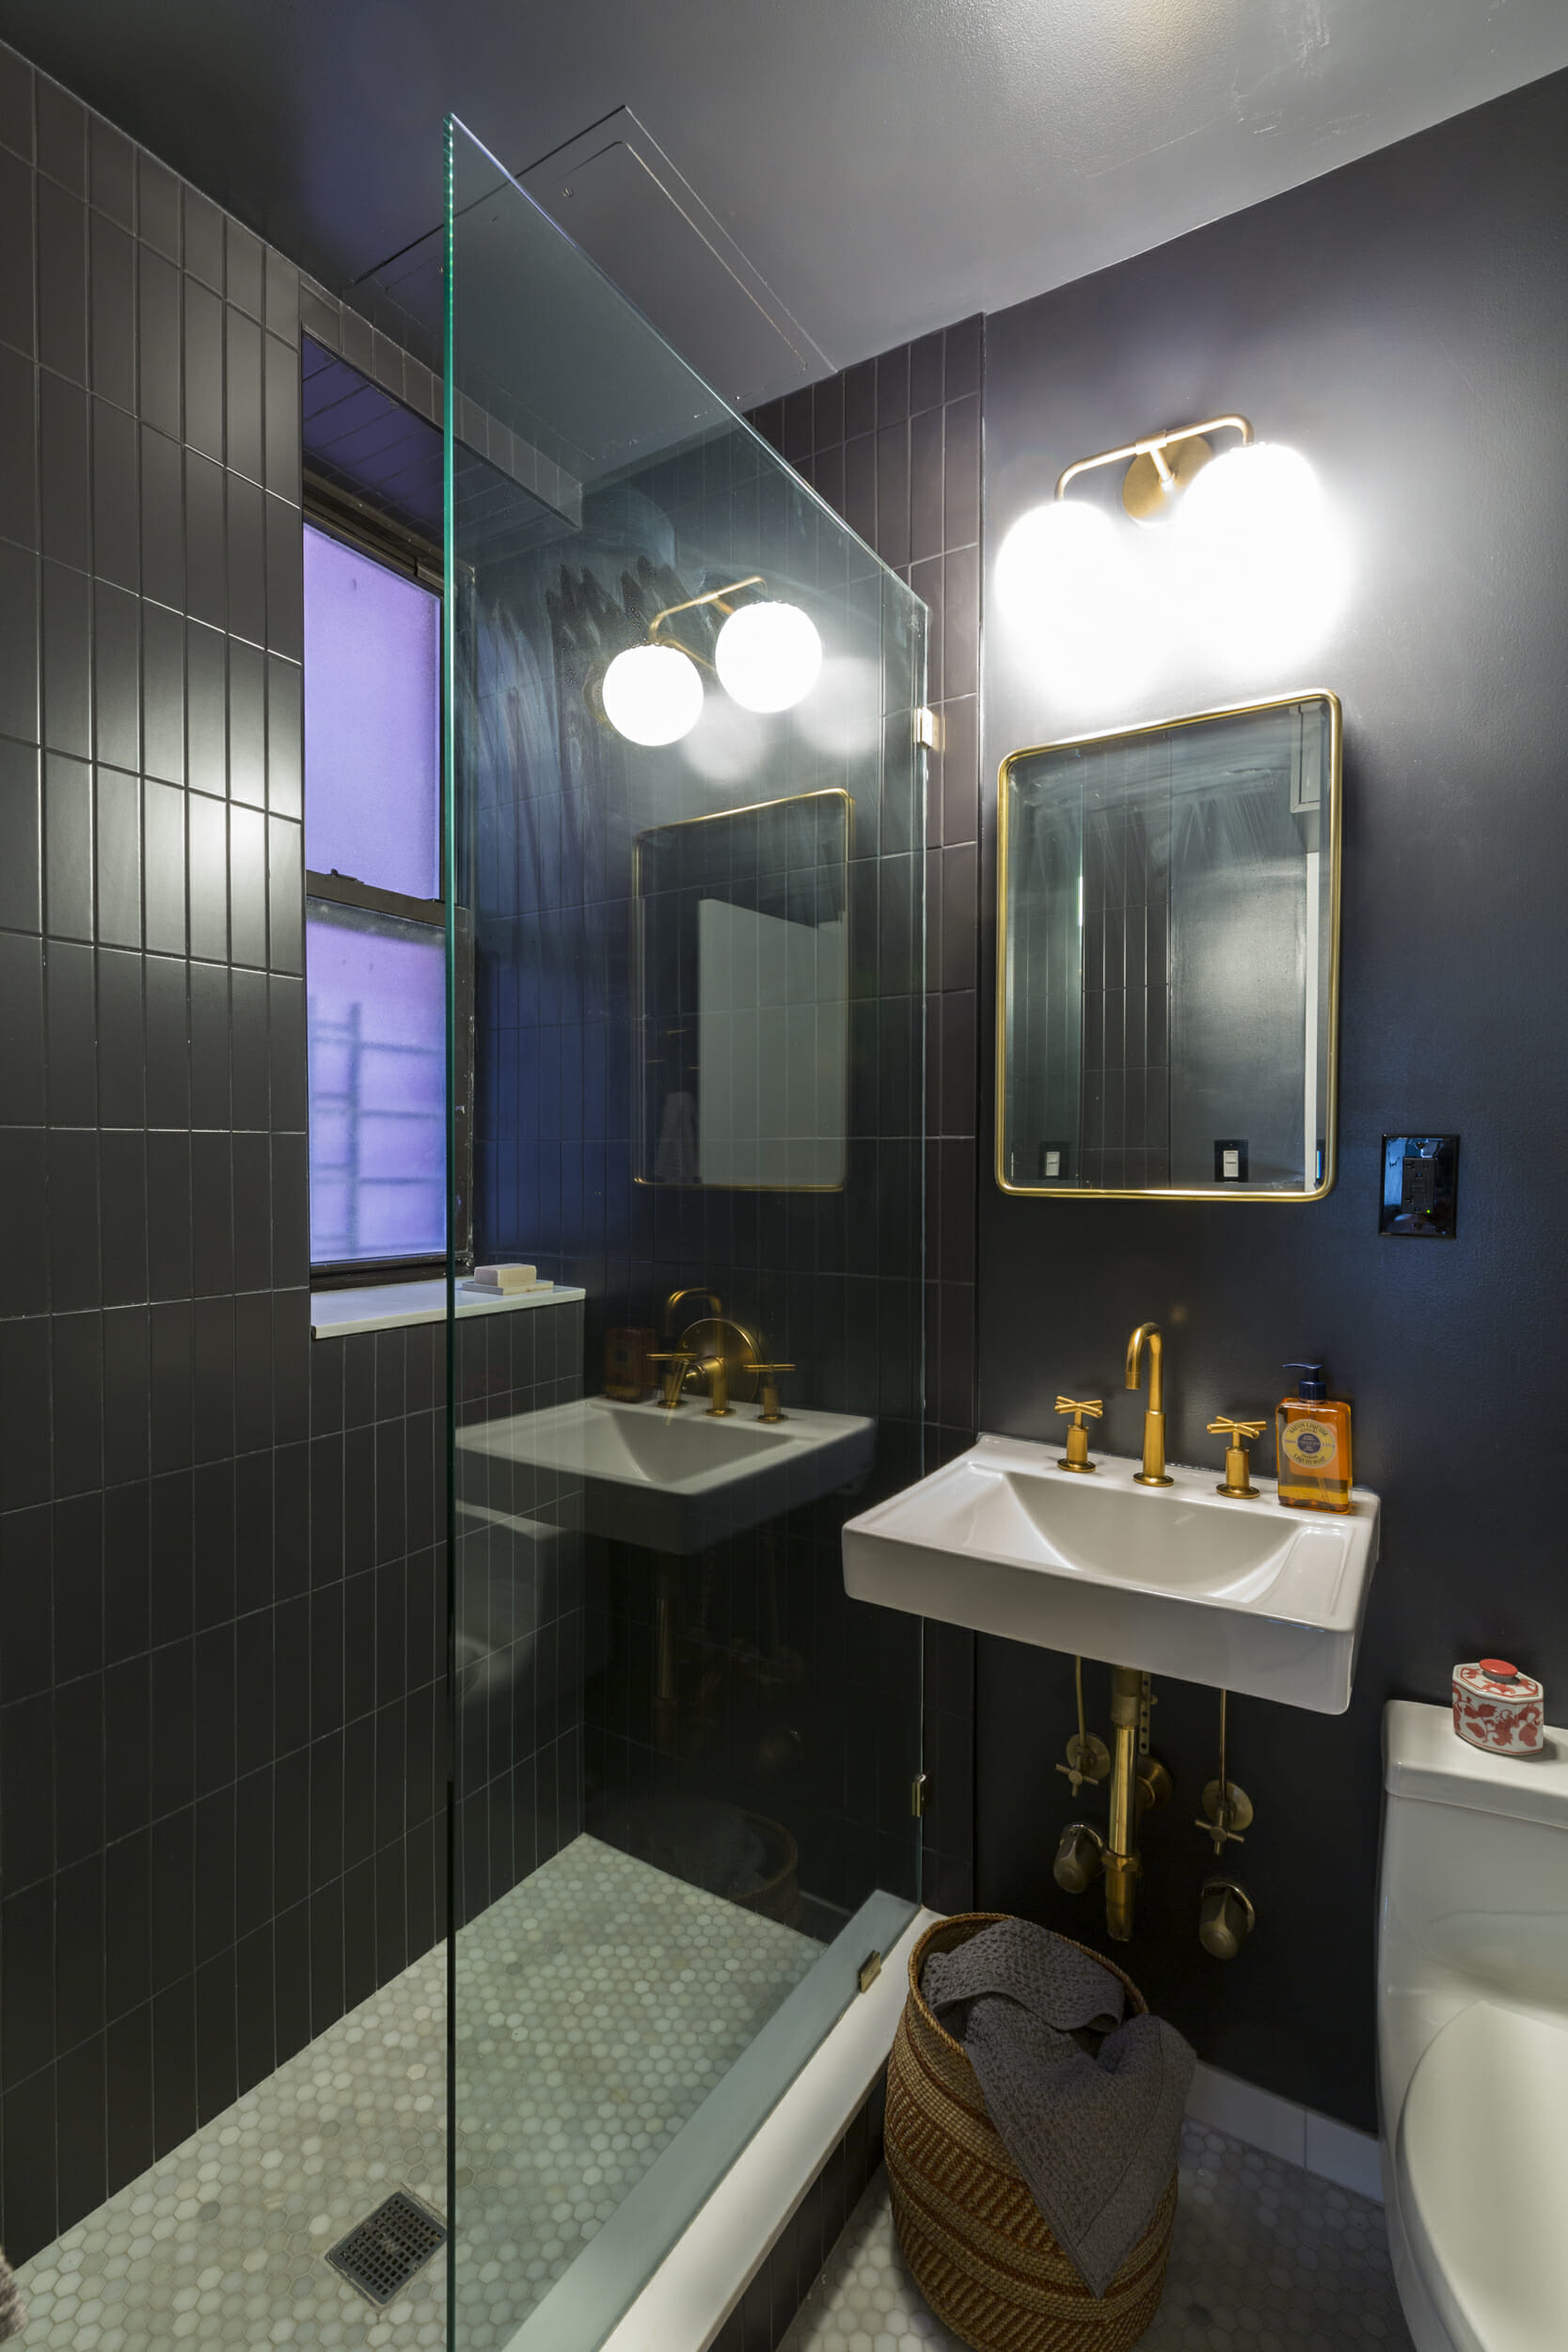 A tiny bathroom with black walls and gold sink, shower, and lighting fixtures.